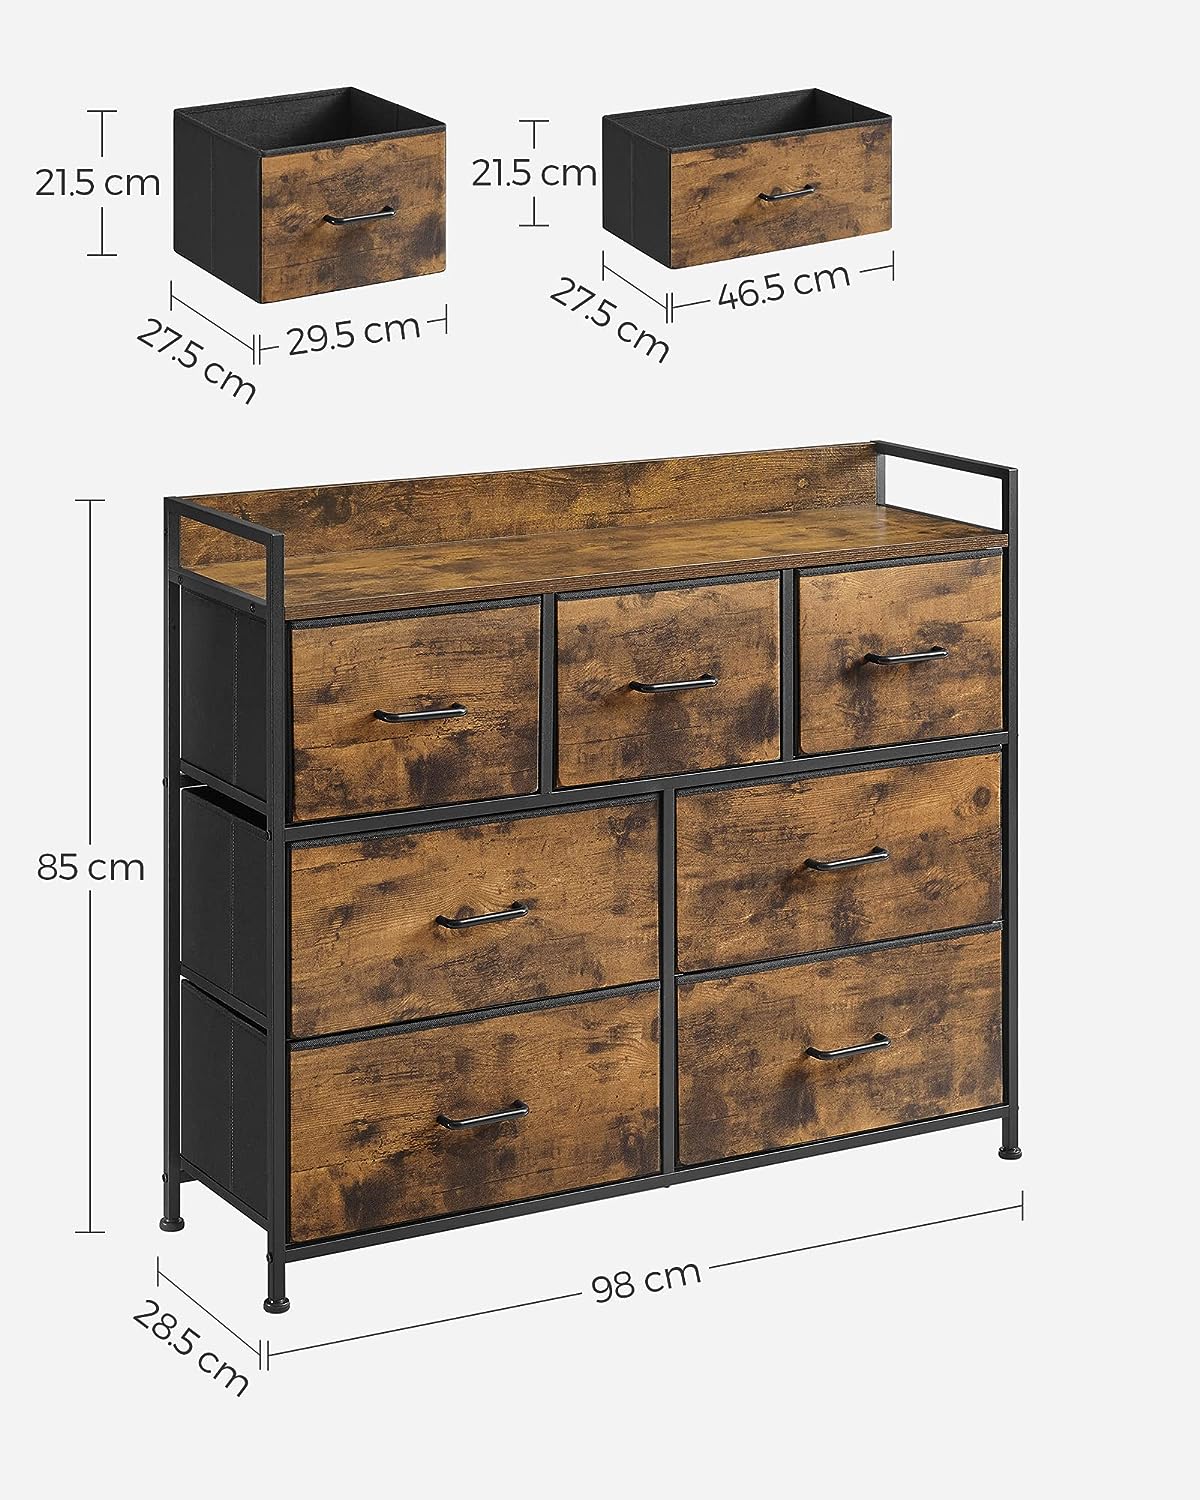 SONGMICS Chest of Drawers, Bedroom Cabinet, 7 Fabric Drawers with Handles, Metal Frame, Industrial Design, Rustic Brown and Black LTS137B01